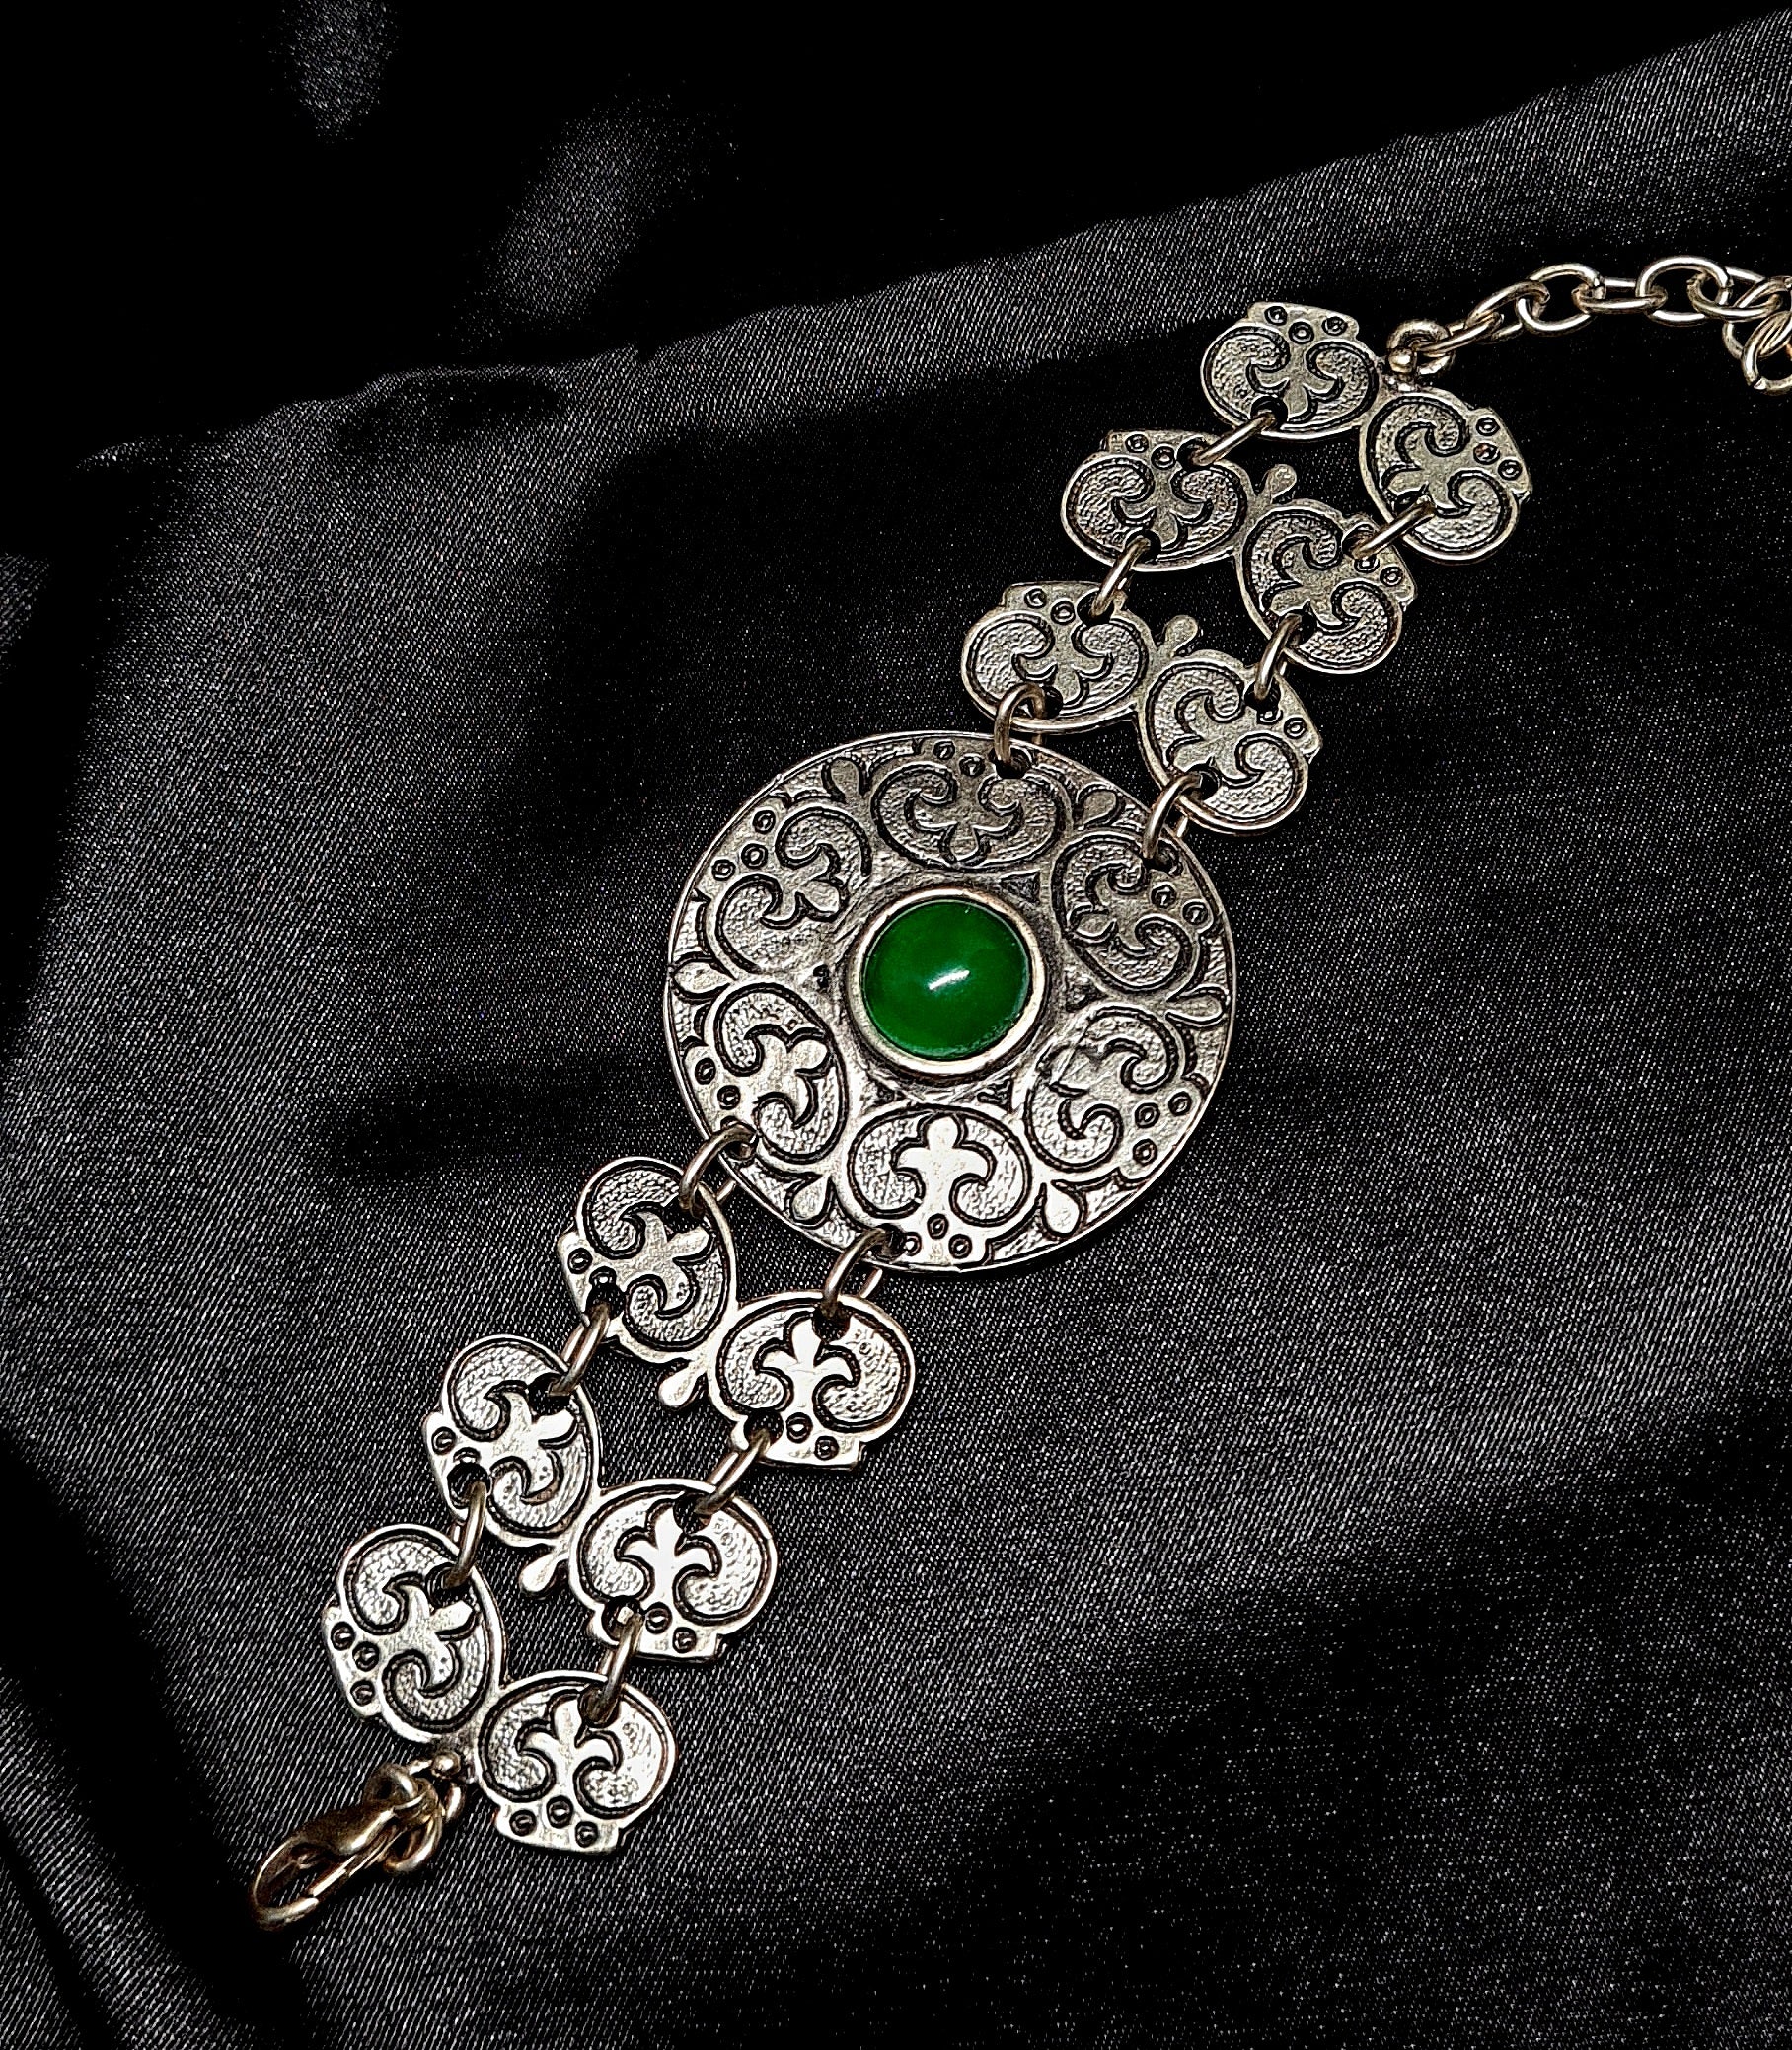 A silver bracelet with a green stone in the center. The bracelet is made of silver and has a delicate design. The green stone is oval-shaped and has a smooth finish. 